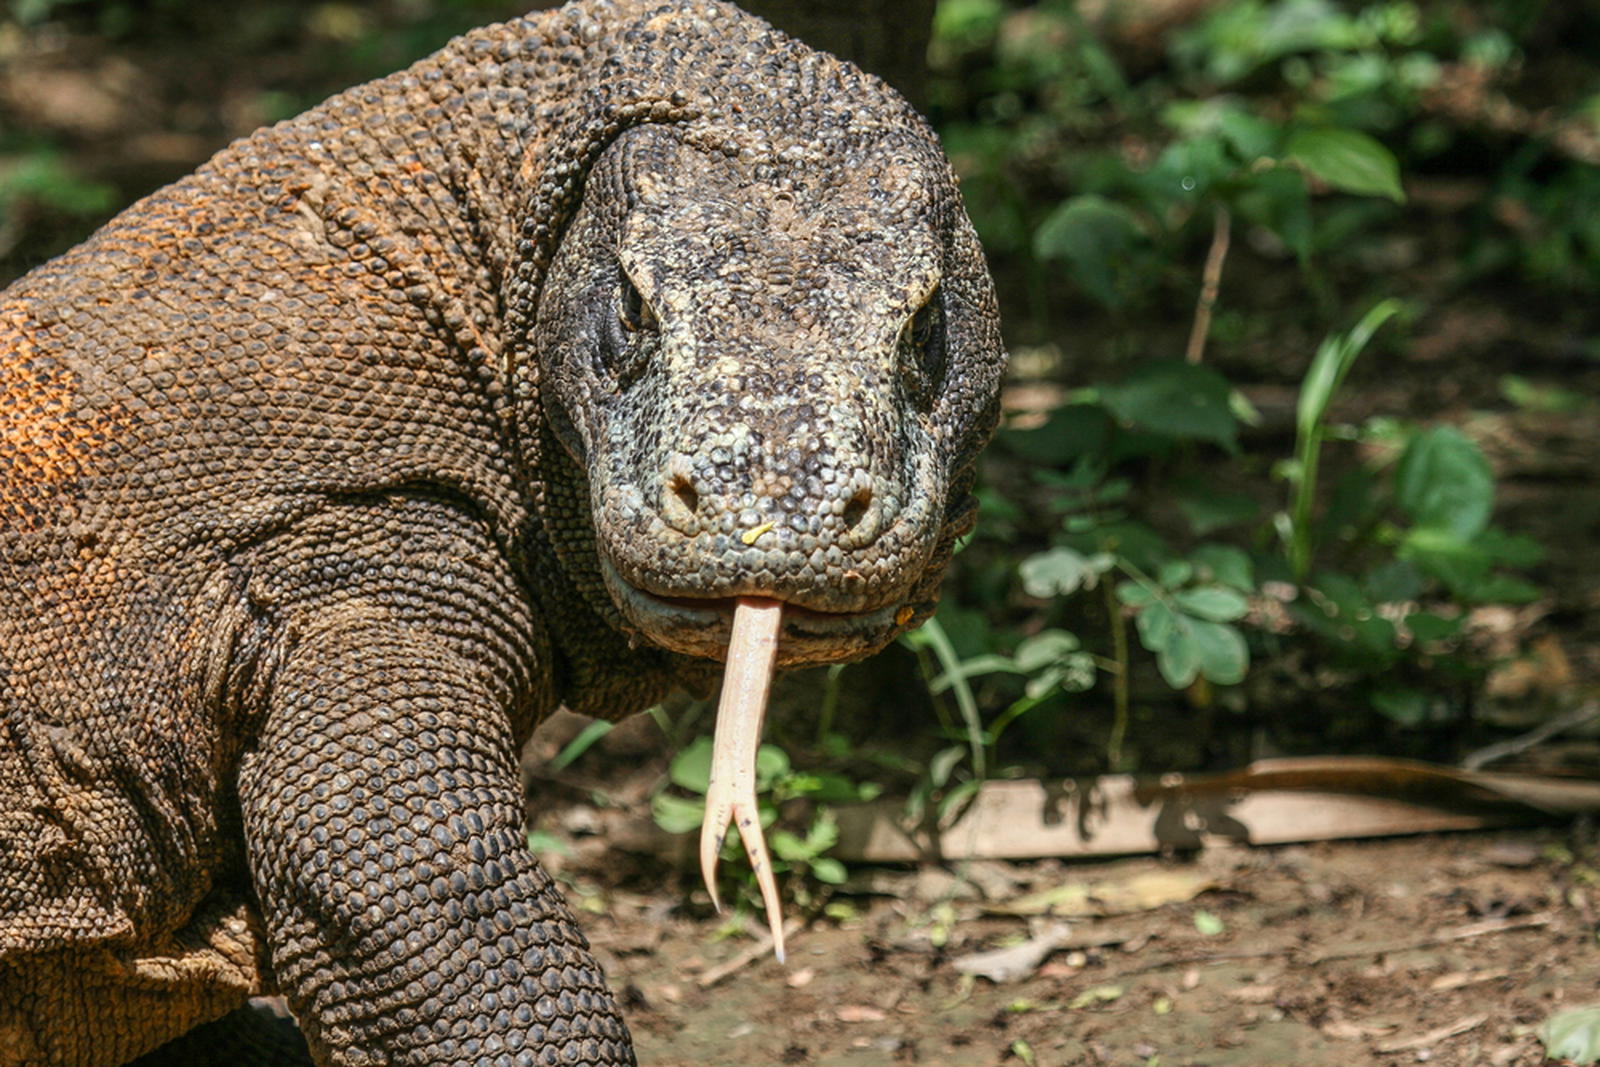 Komodo Dragon: 5 facts about the ‘largest lizard’ on Earth